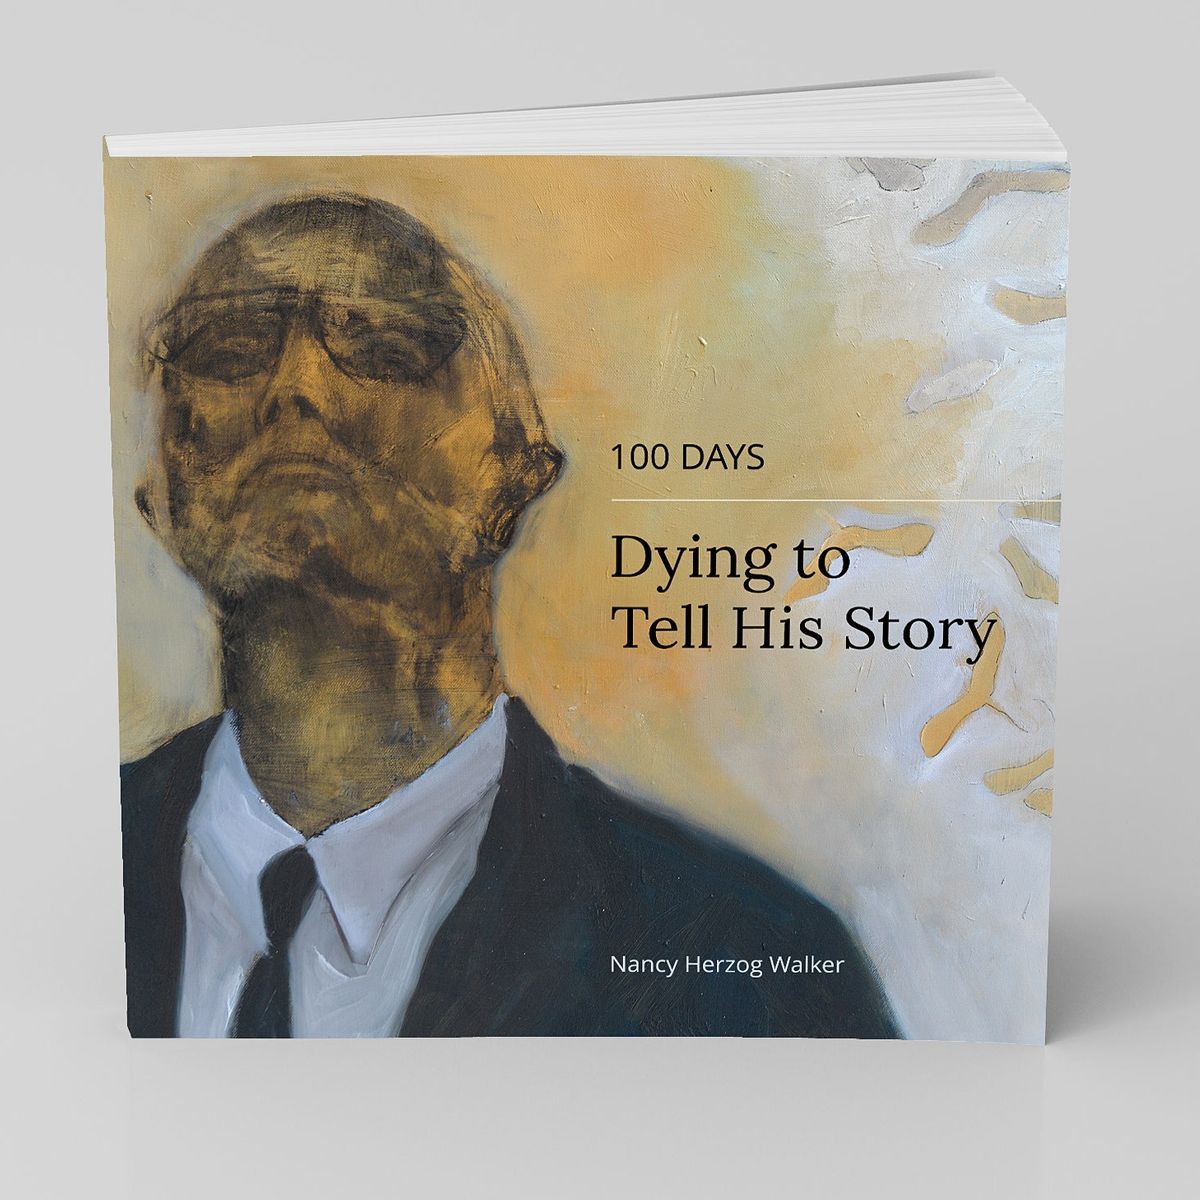 Book Club Event: "100 Days: Dying to Tell His Story"